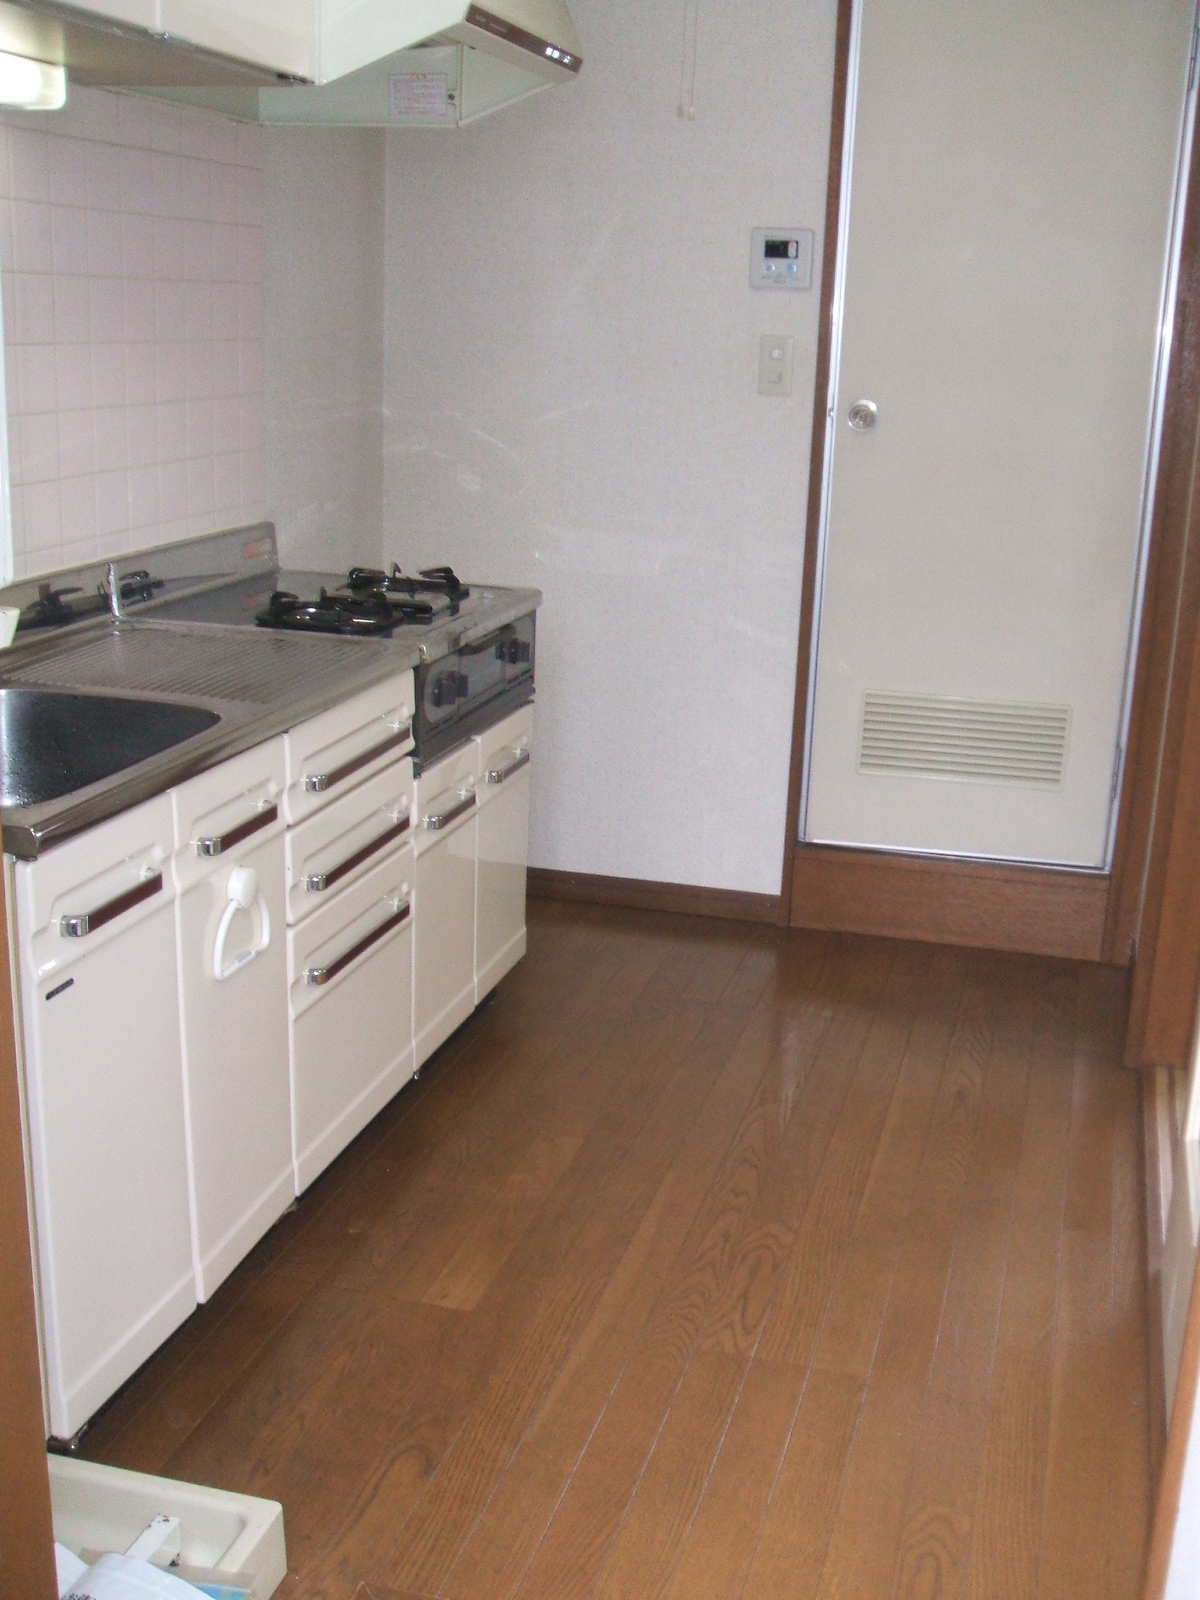 Kitchen. Separate photo  ☆ Kitchen space is divided with living room ☆